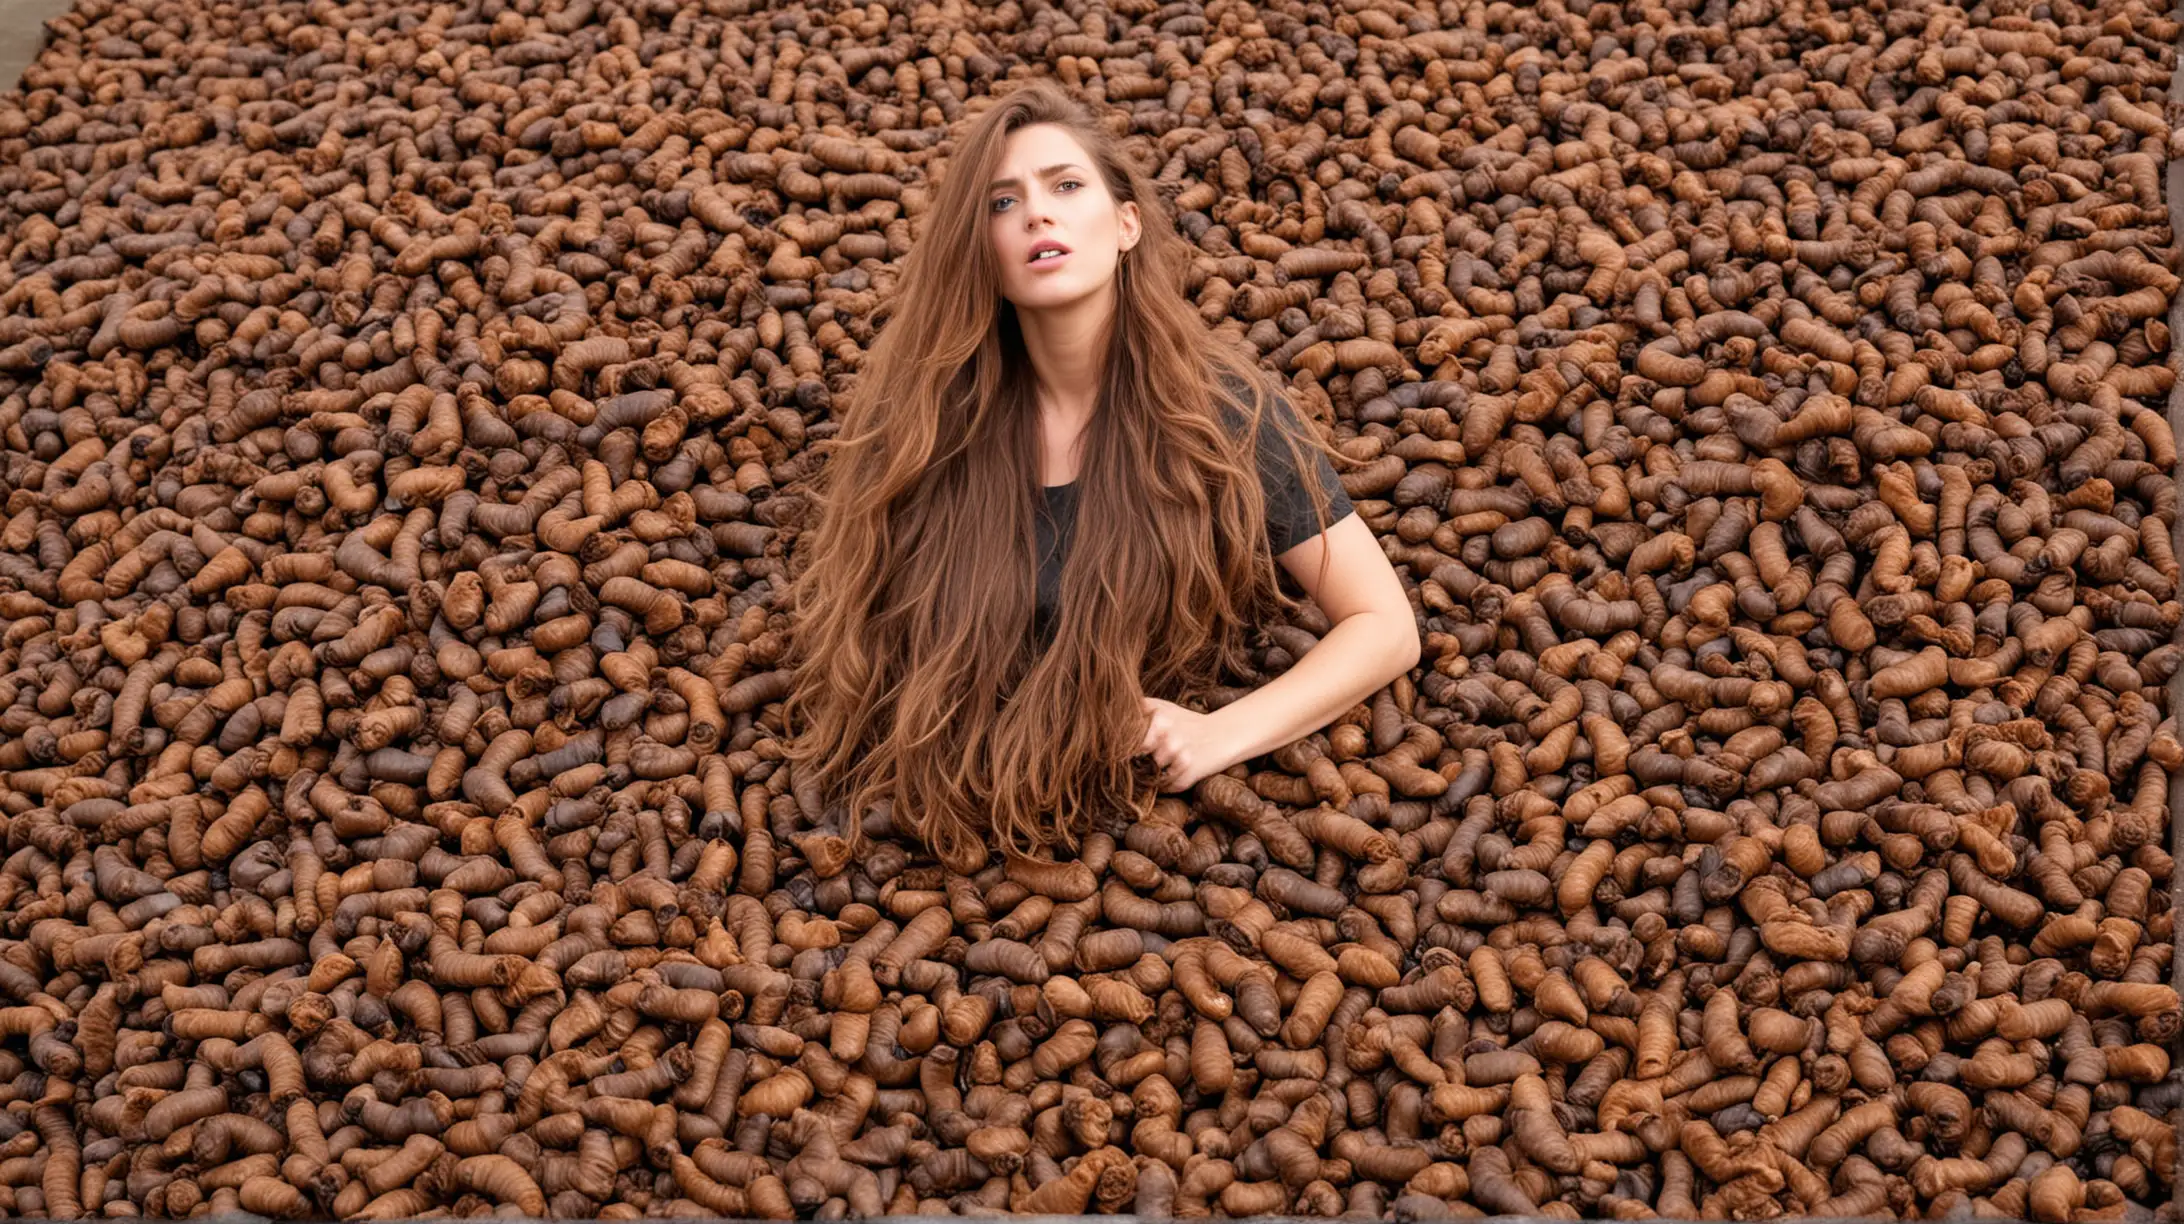 Woman with a Giant Pile of Earthy Material